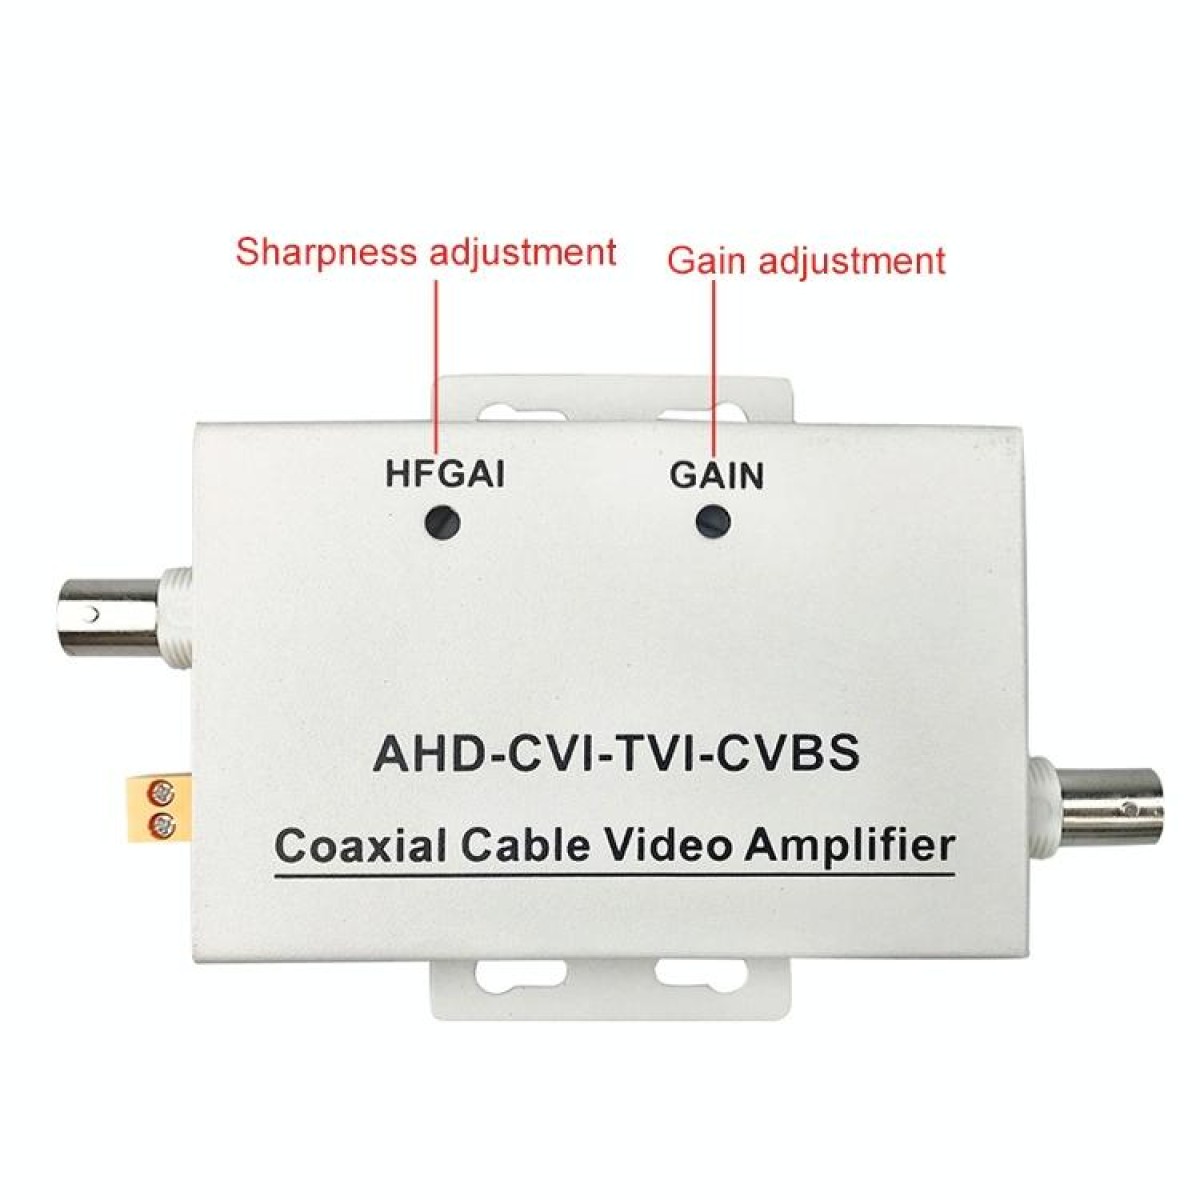 Coaxial Cable Video Amplifier